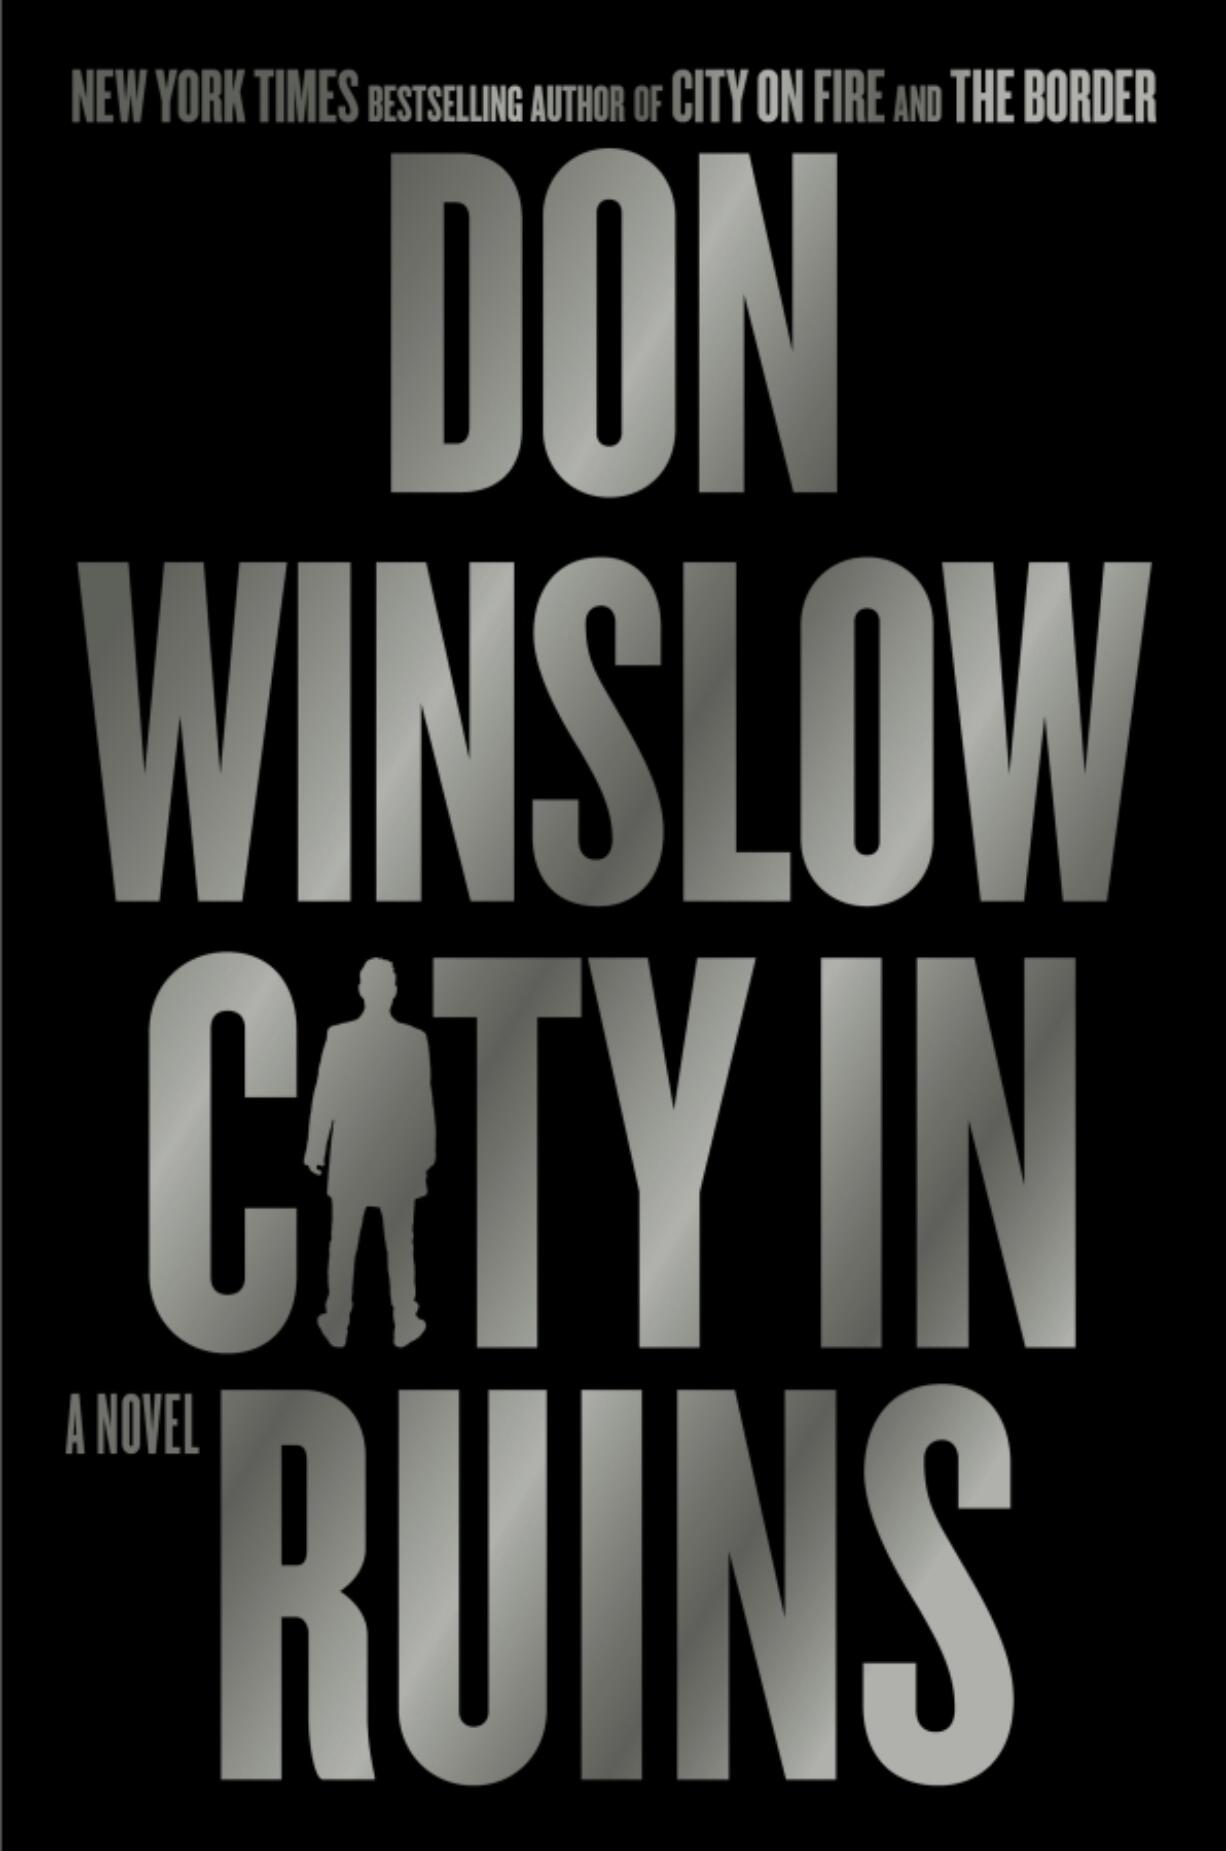 &ldquo;City in Ruins&rdquo; by Don Winslow.